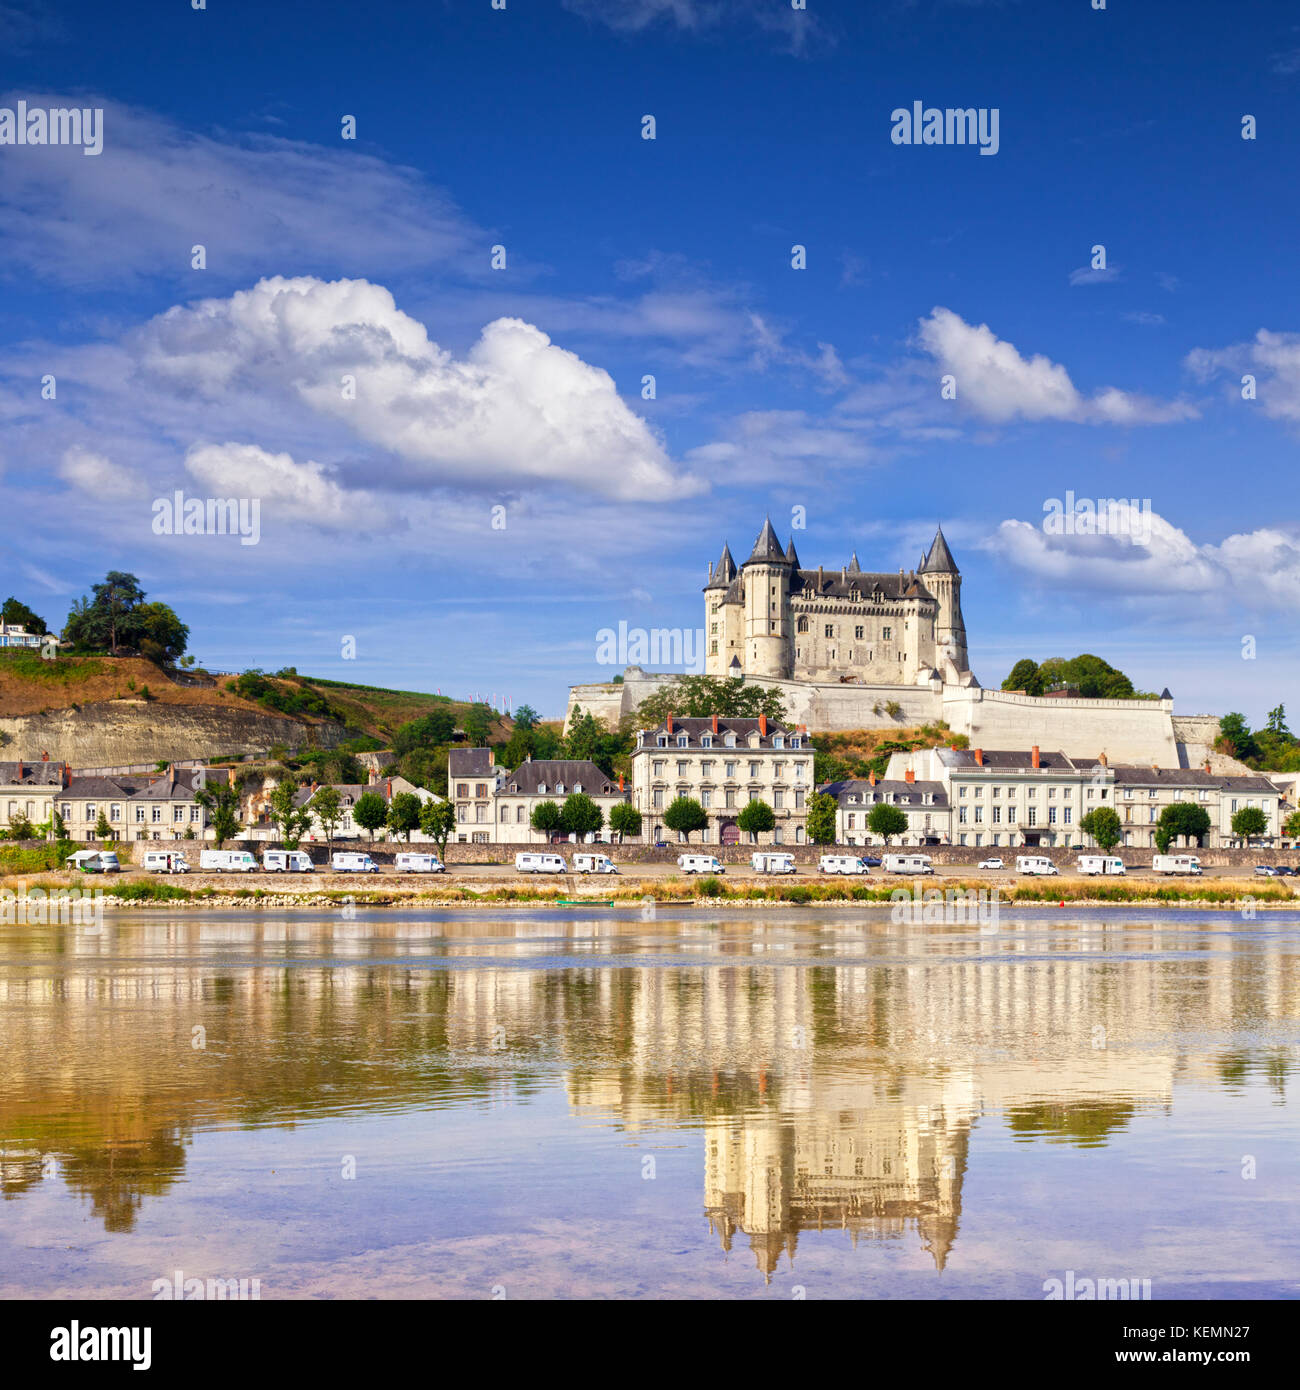 Saumur on the banks of the Loire River, Loire Valley, France. A long row of camper vans can be seen parked below the chateau. Stock Photo